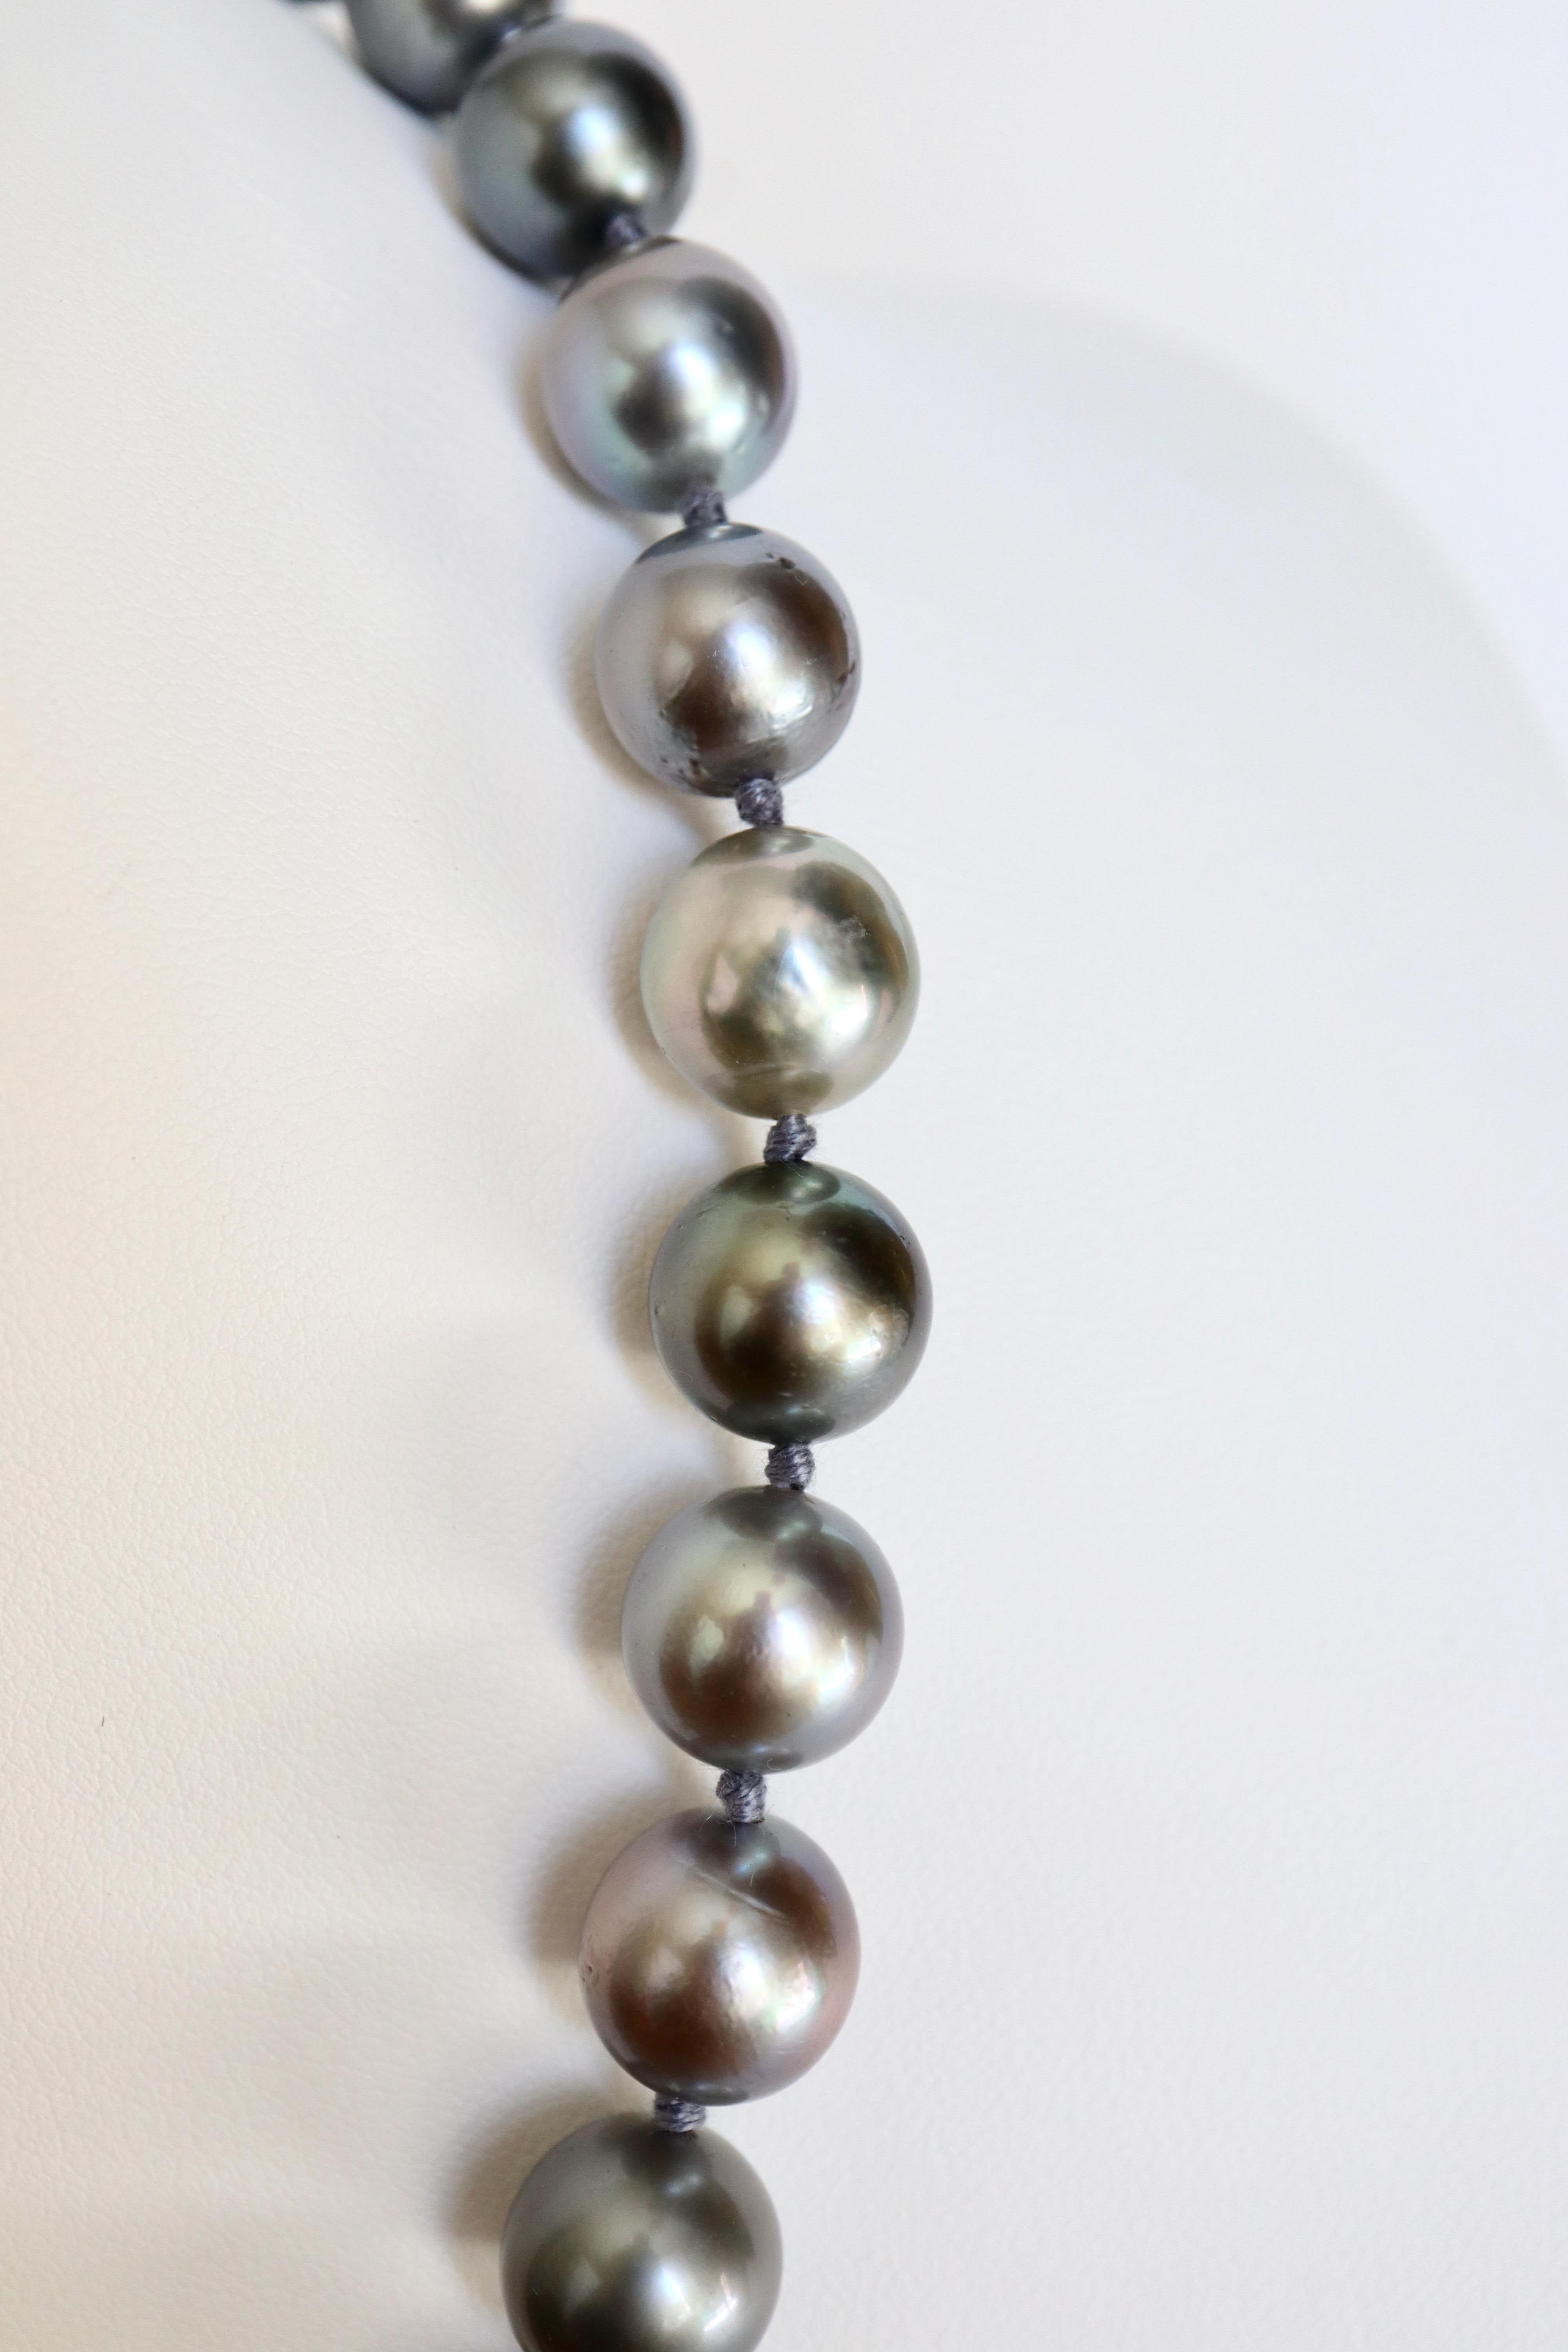 Bead Necklace of Cultured Grey Pearls 9 mm to 13 mm For Sale